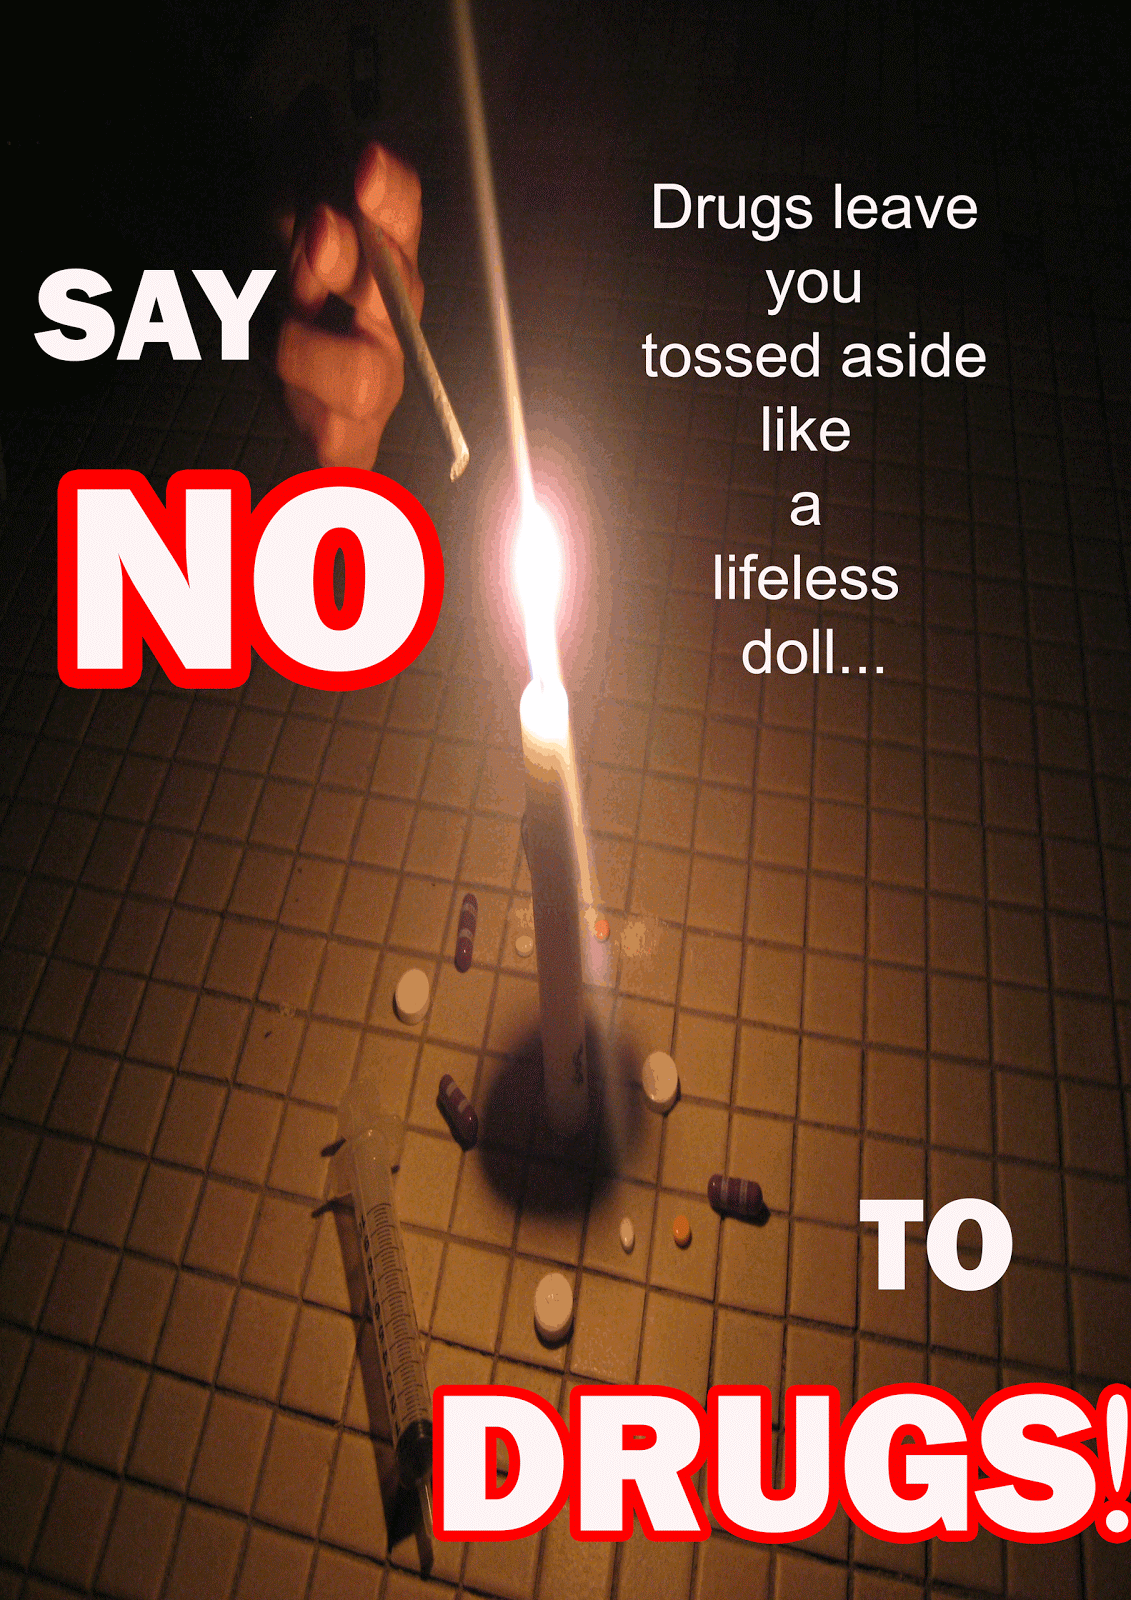 EnglishIT: Say No To Drugs poster..